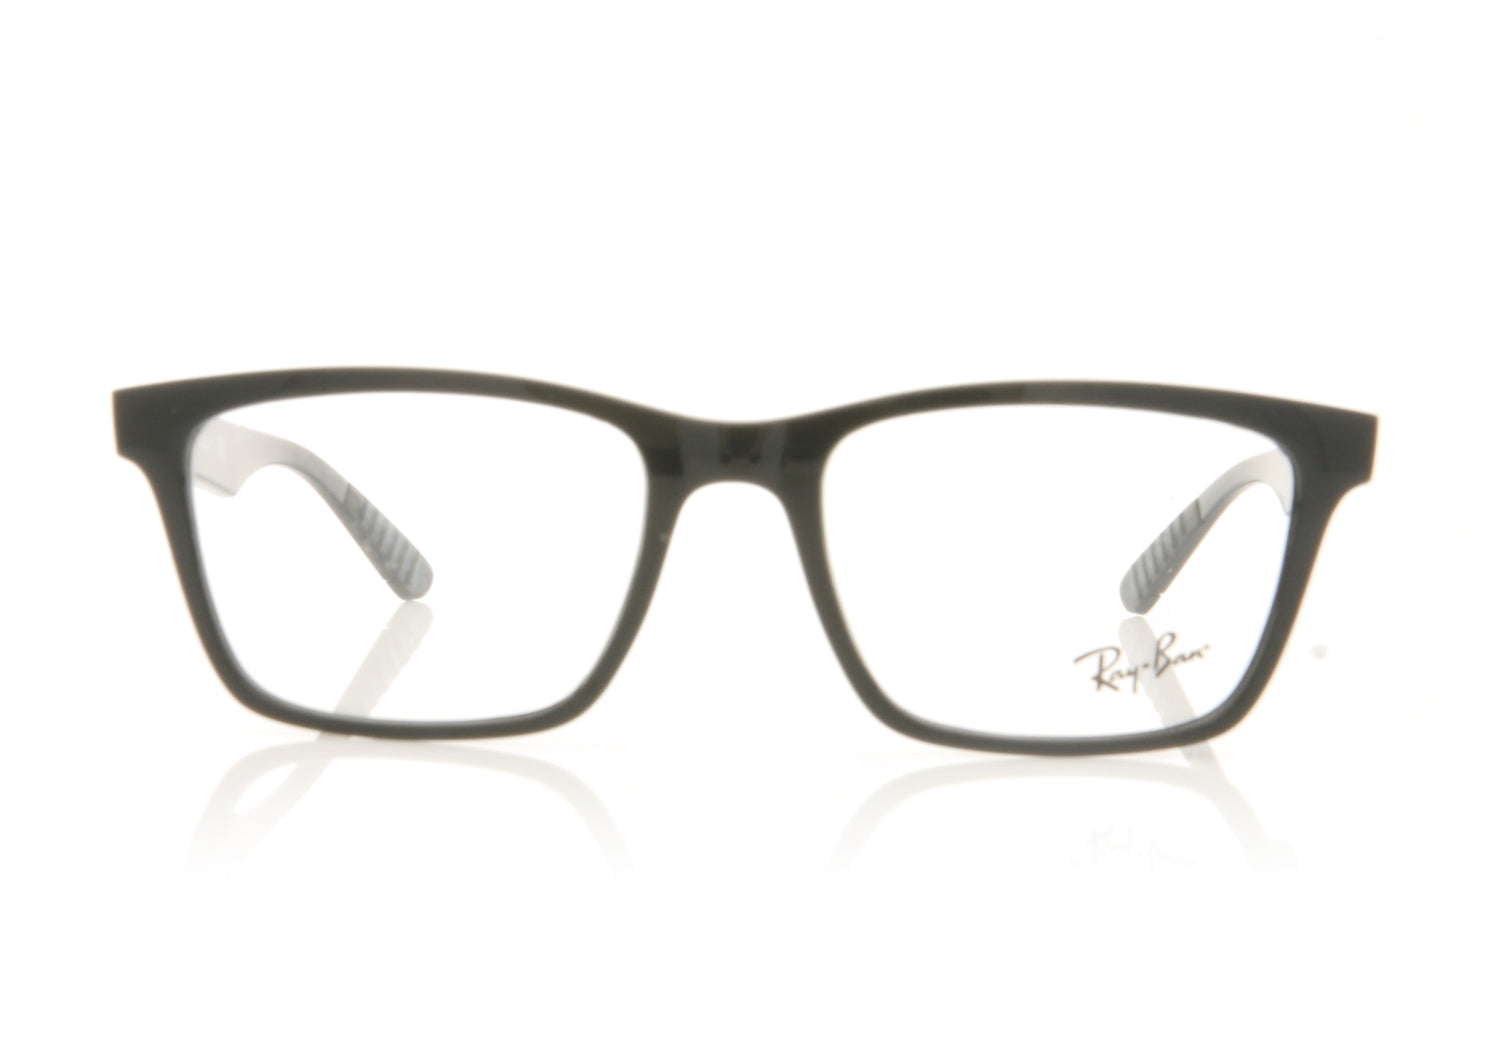 Ray-Ban RB7025 2000 Shiny Black Glasses - Front